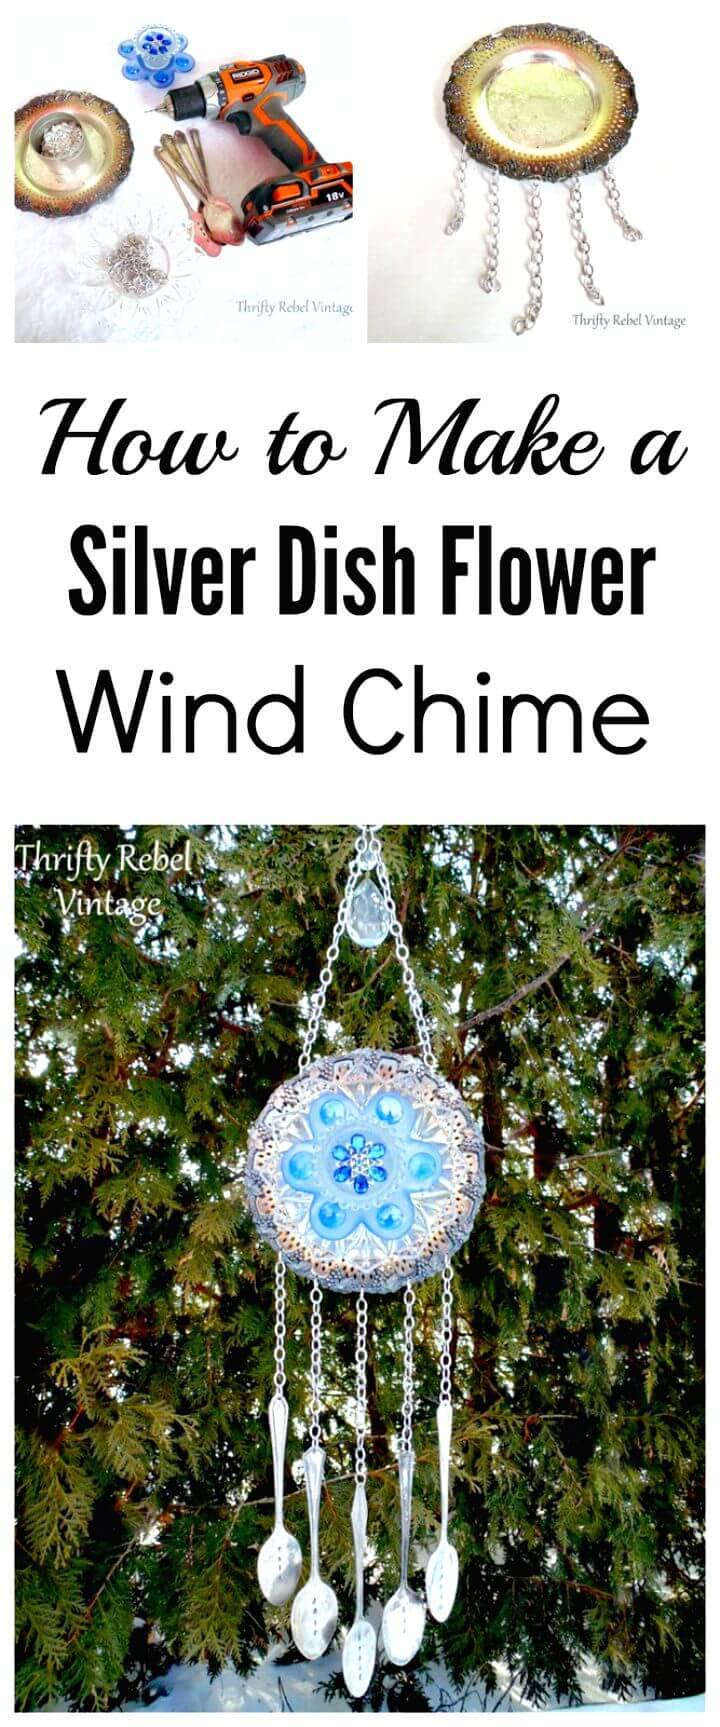 How To Make A Garden Plate Flower Wind Chime Tutorial